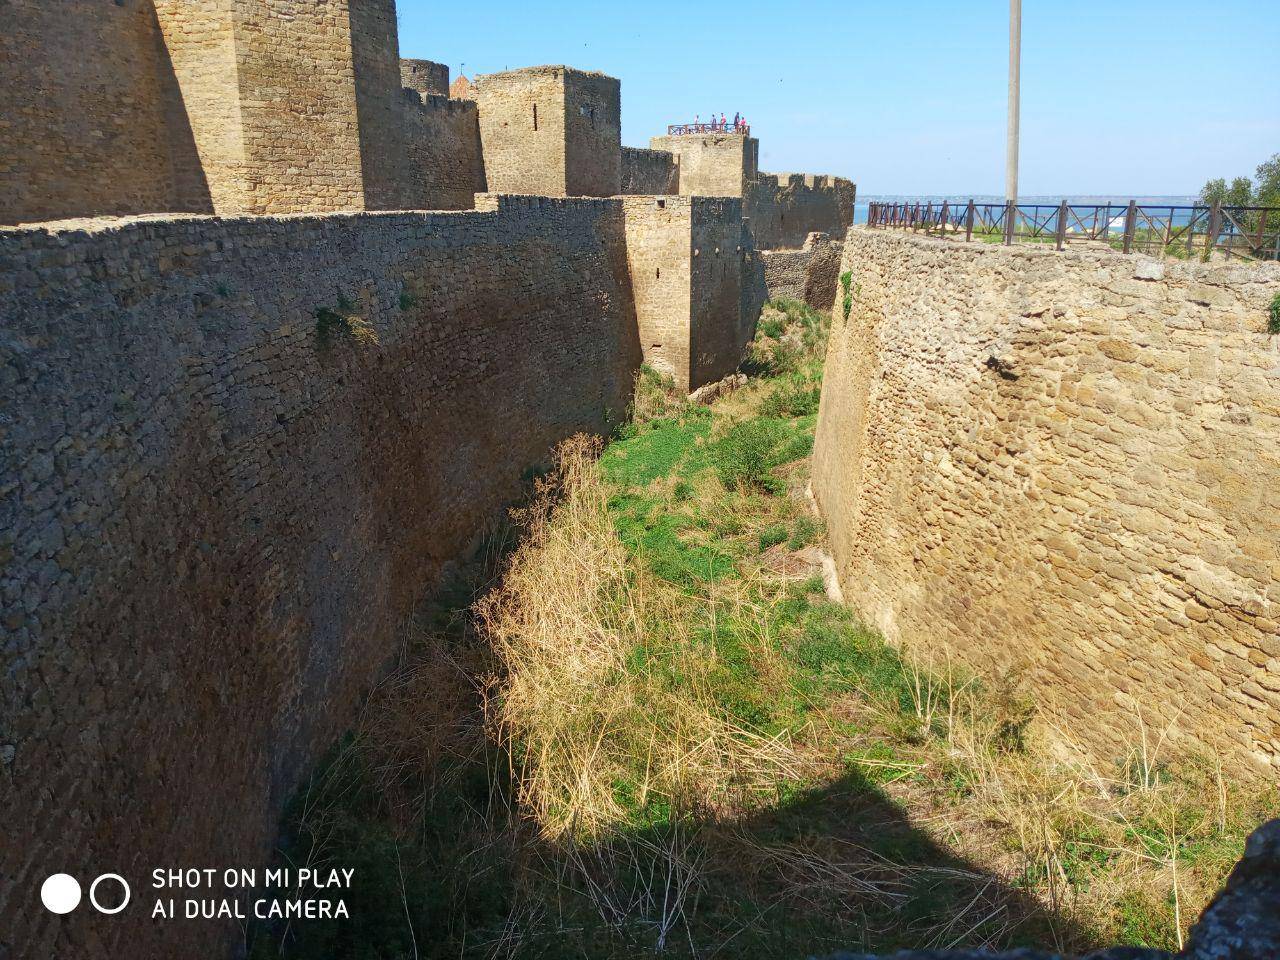 The ancient walls of the fortress zealously keep their secrets